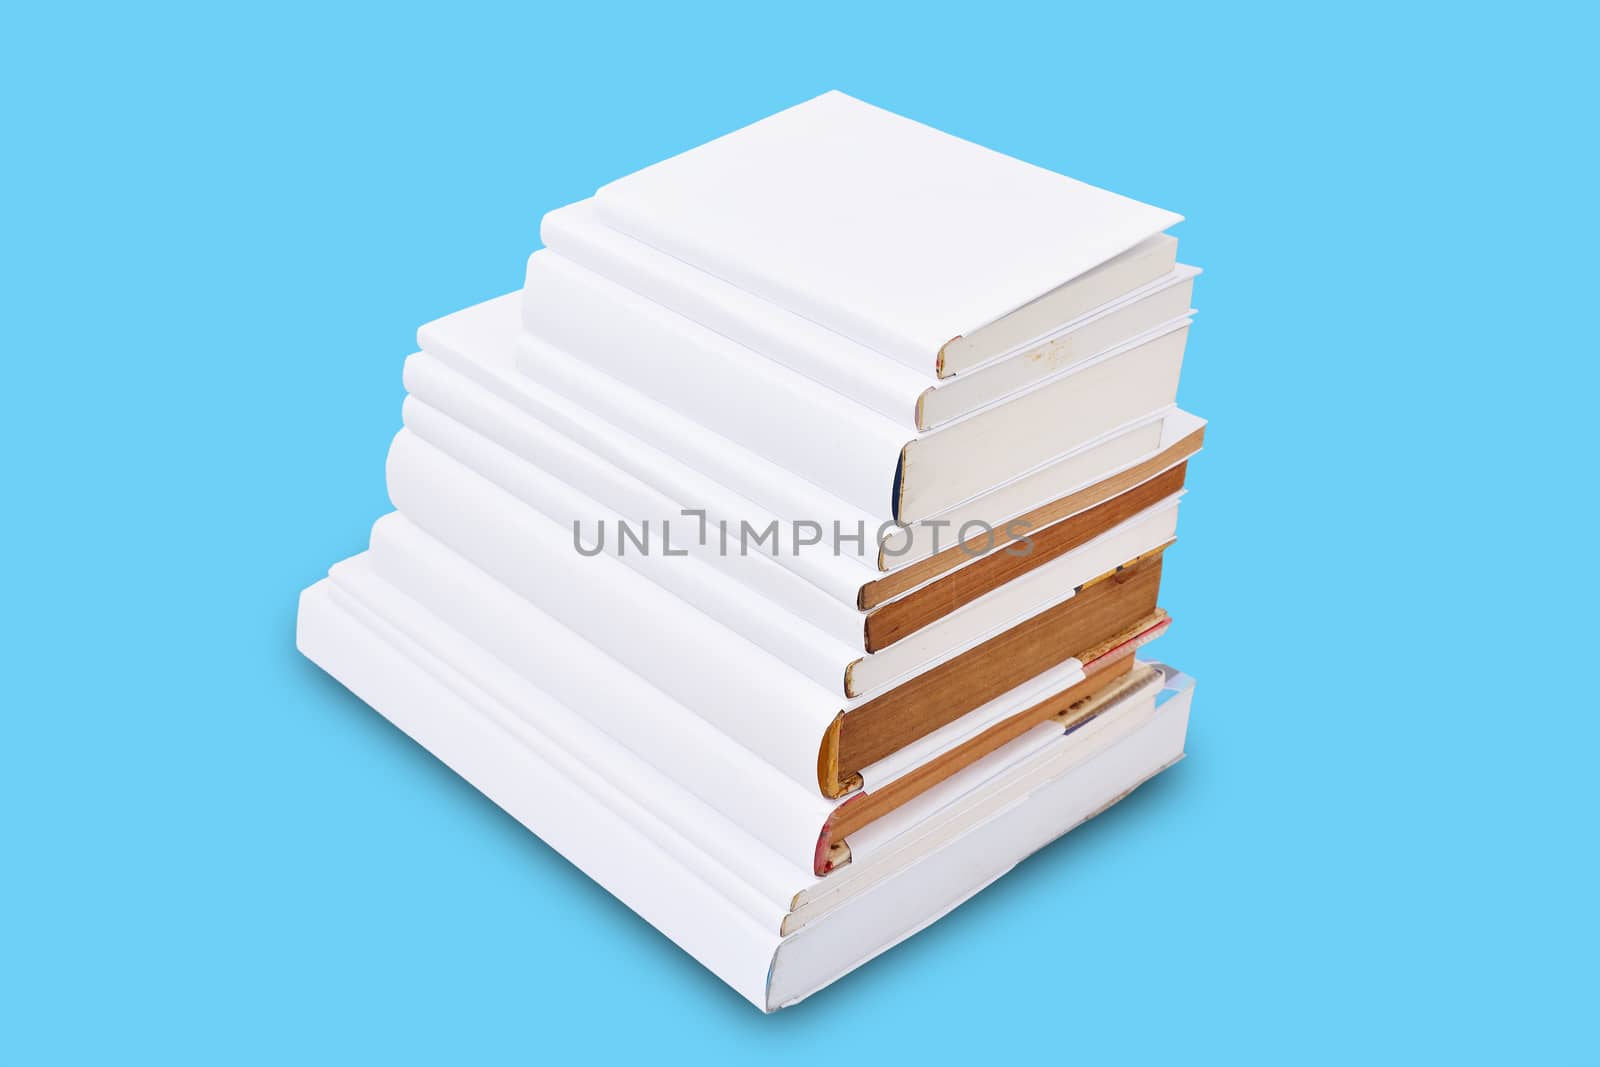 Stack of White Cover Book for use as illustration